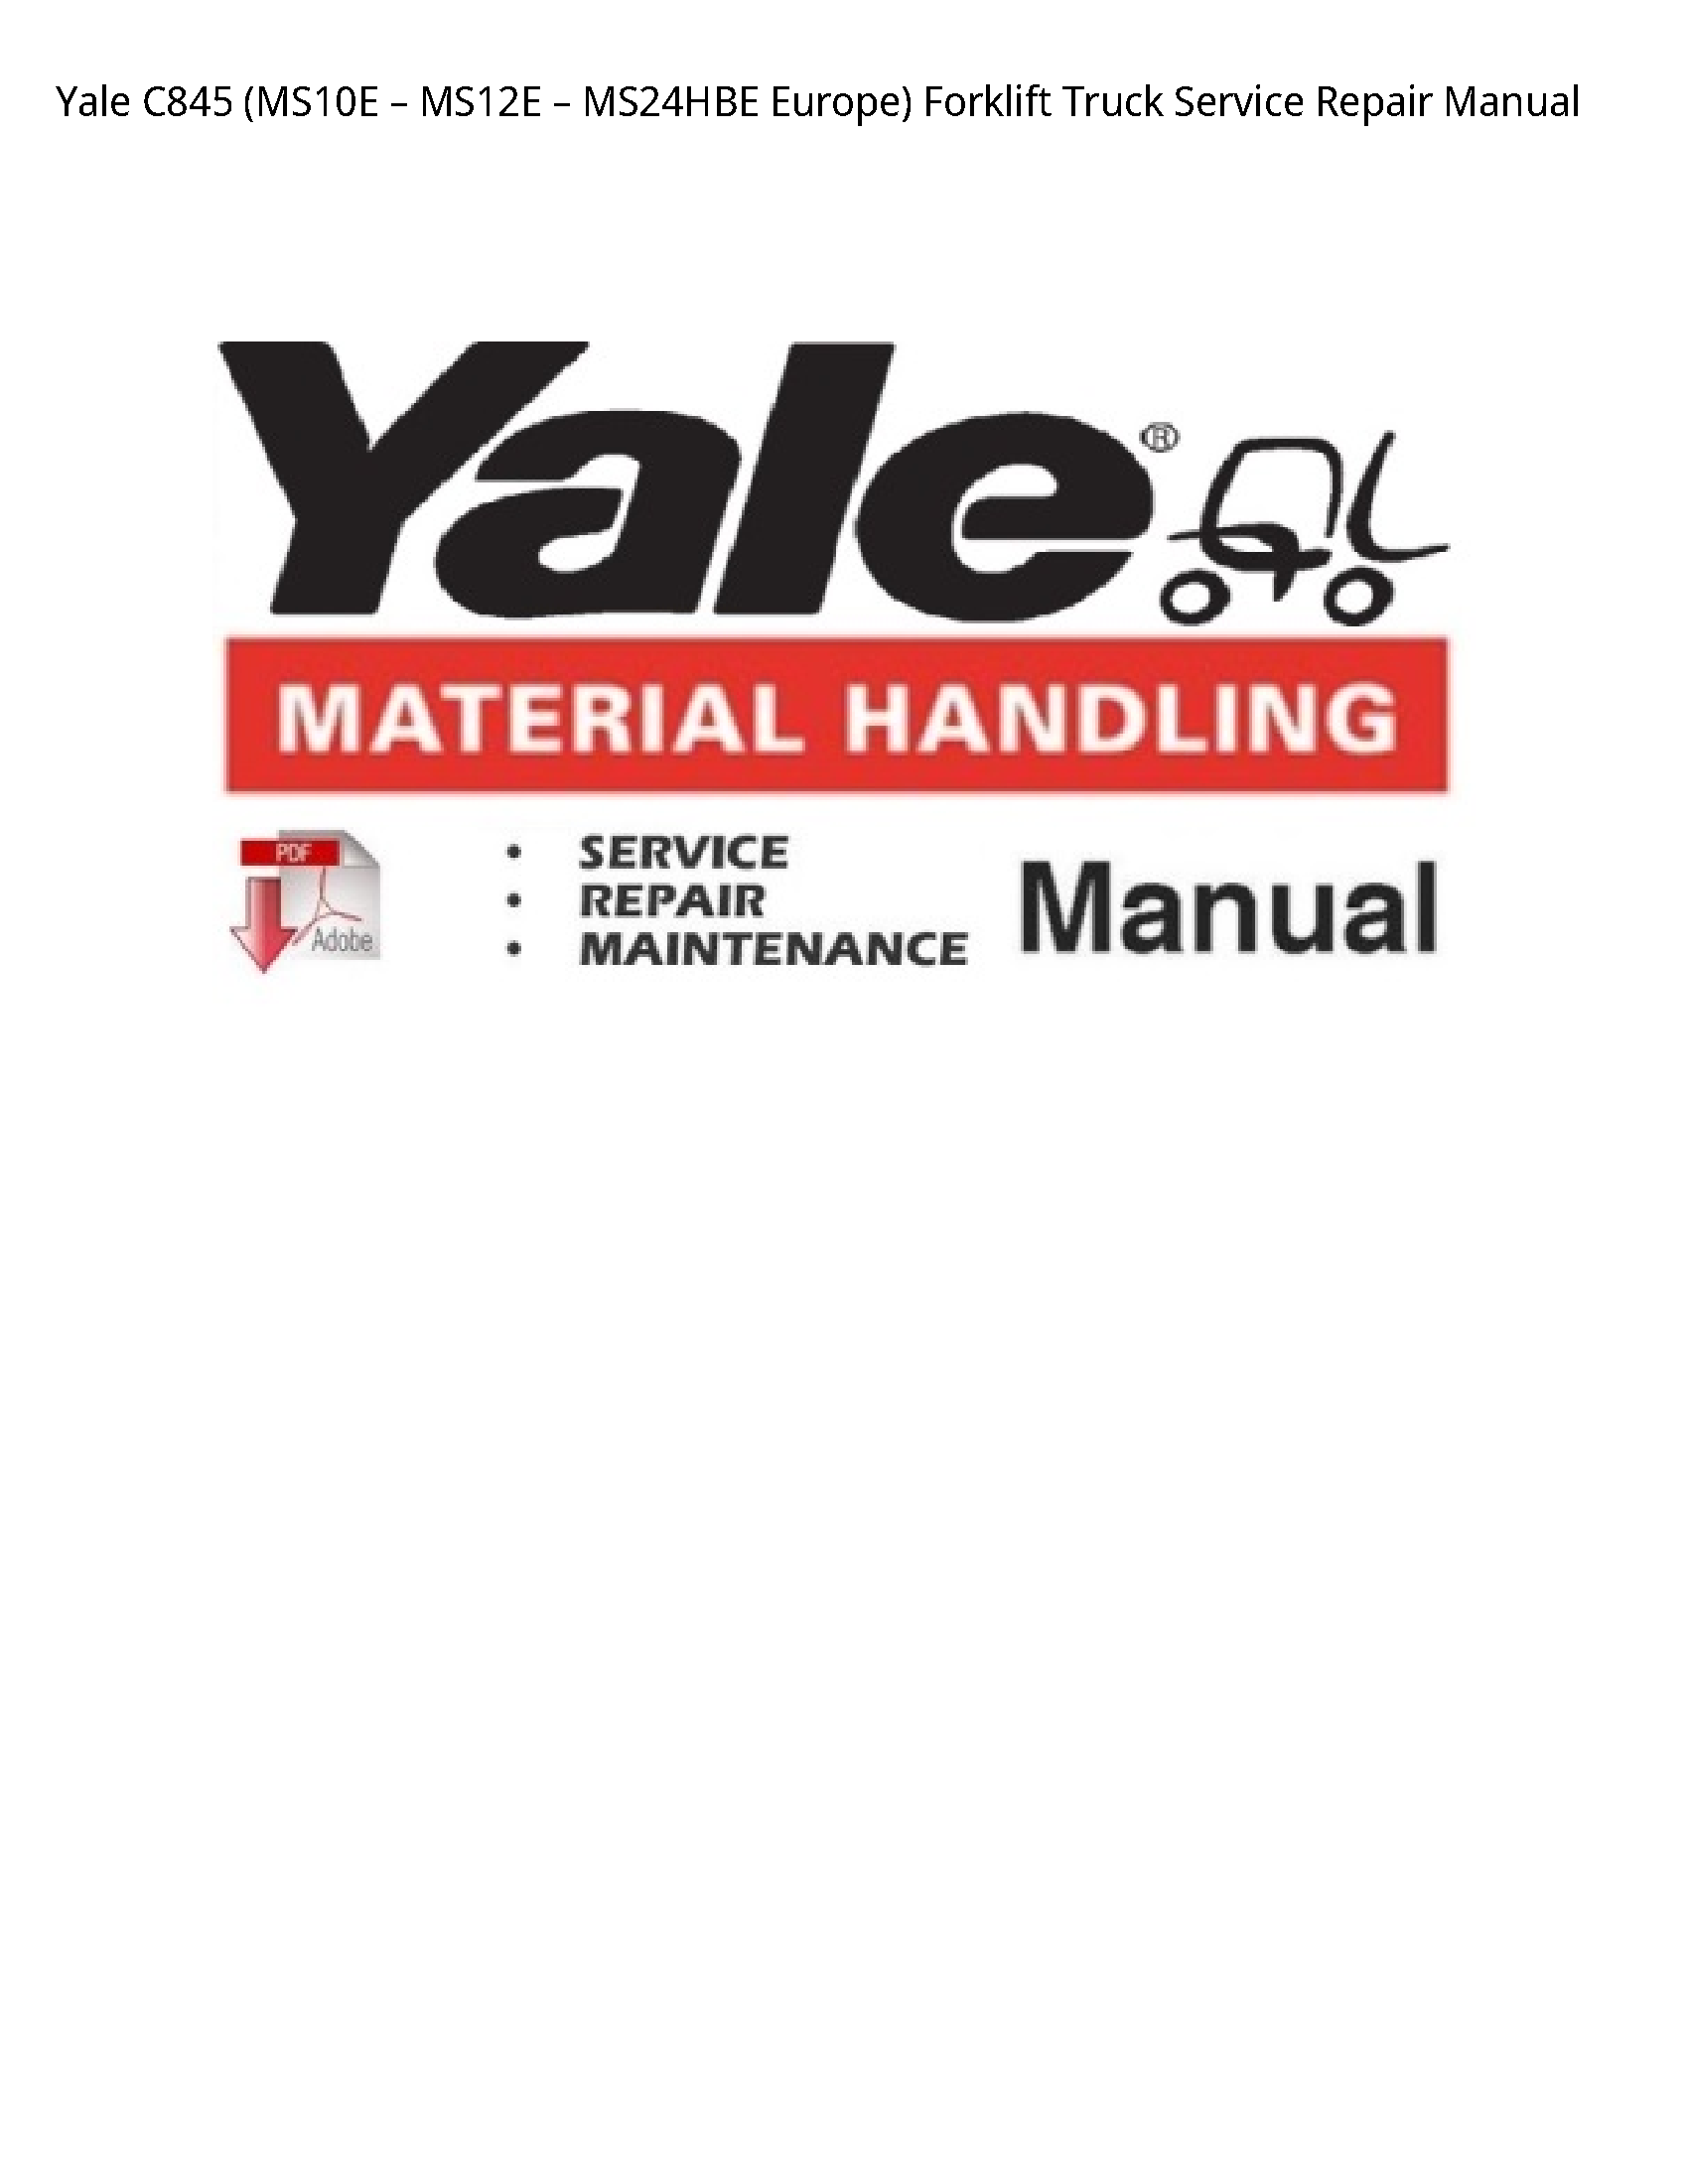 Yale C845 Europe) Forklift Truck manual